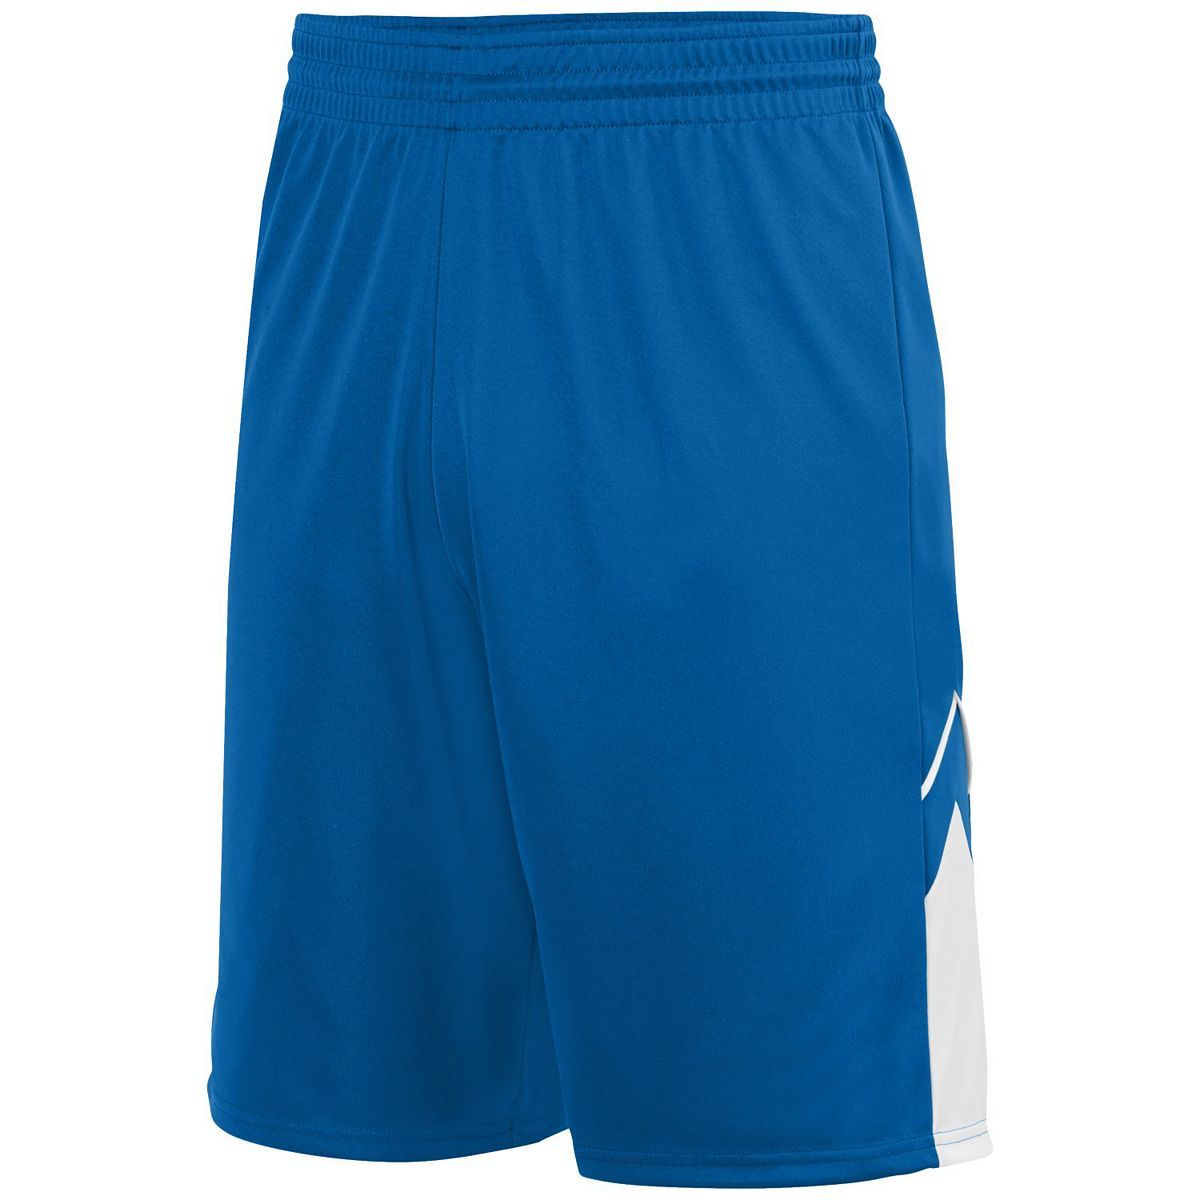 Youth Alley-Oop Reversible Shorts - 1169